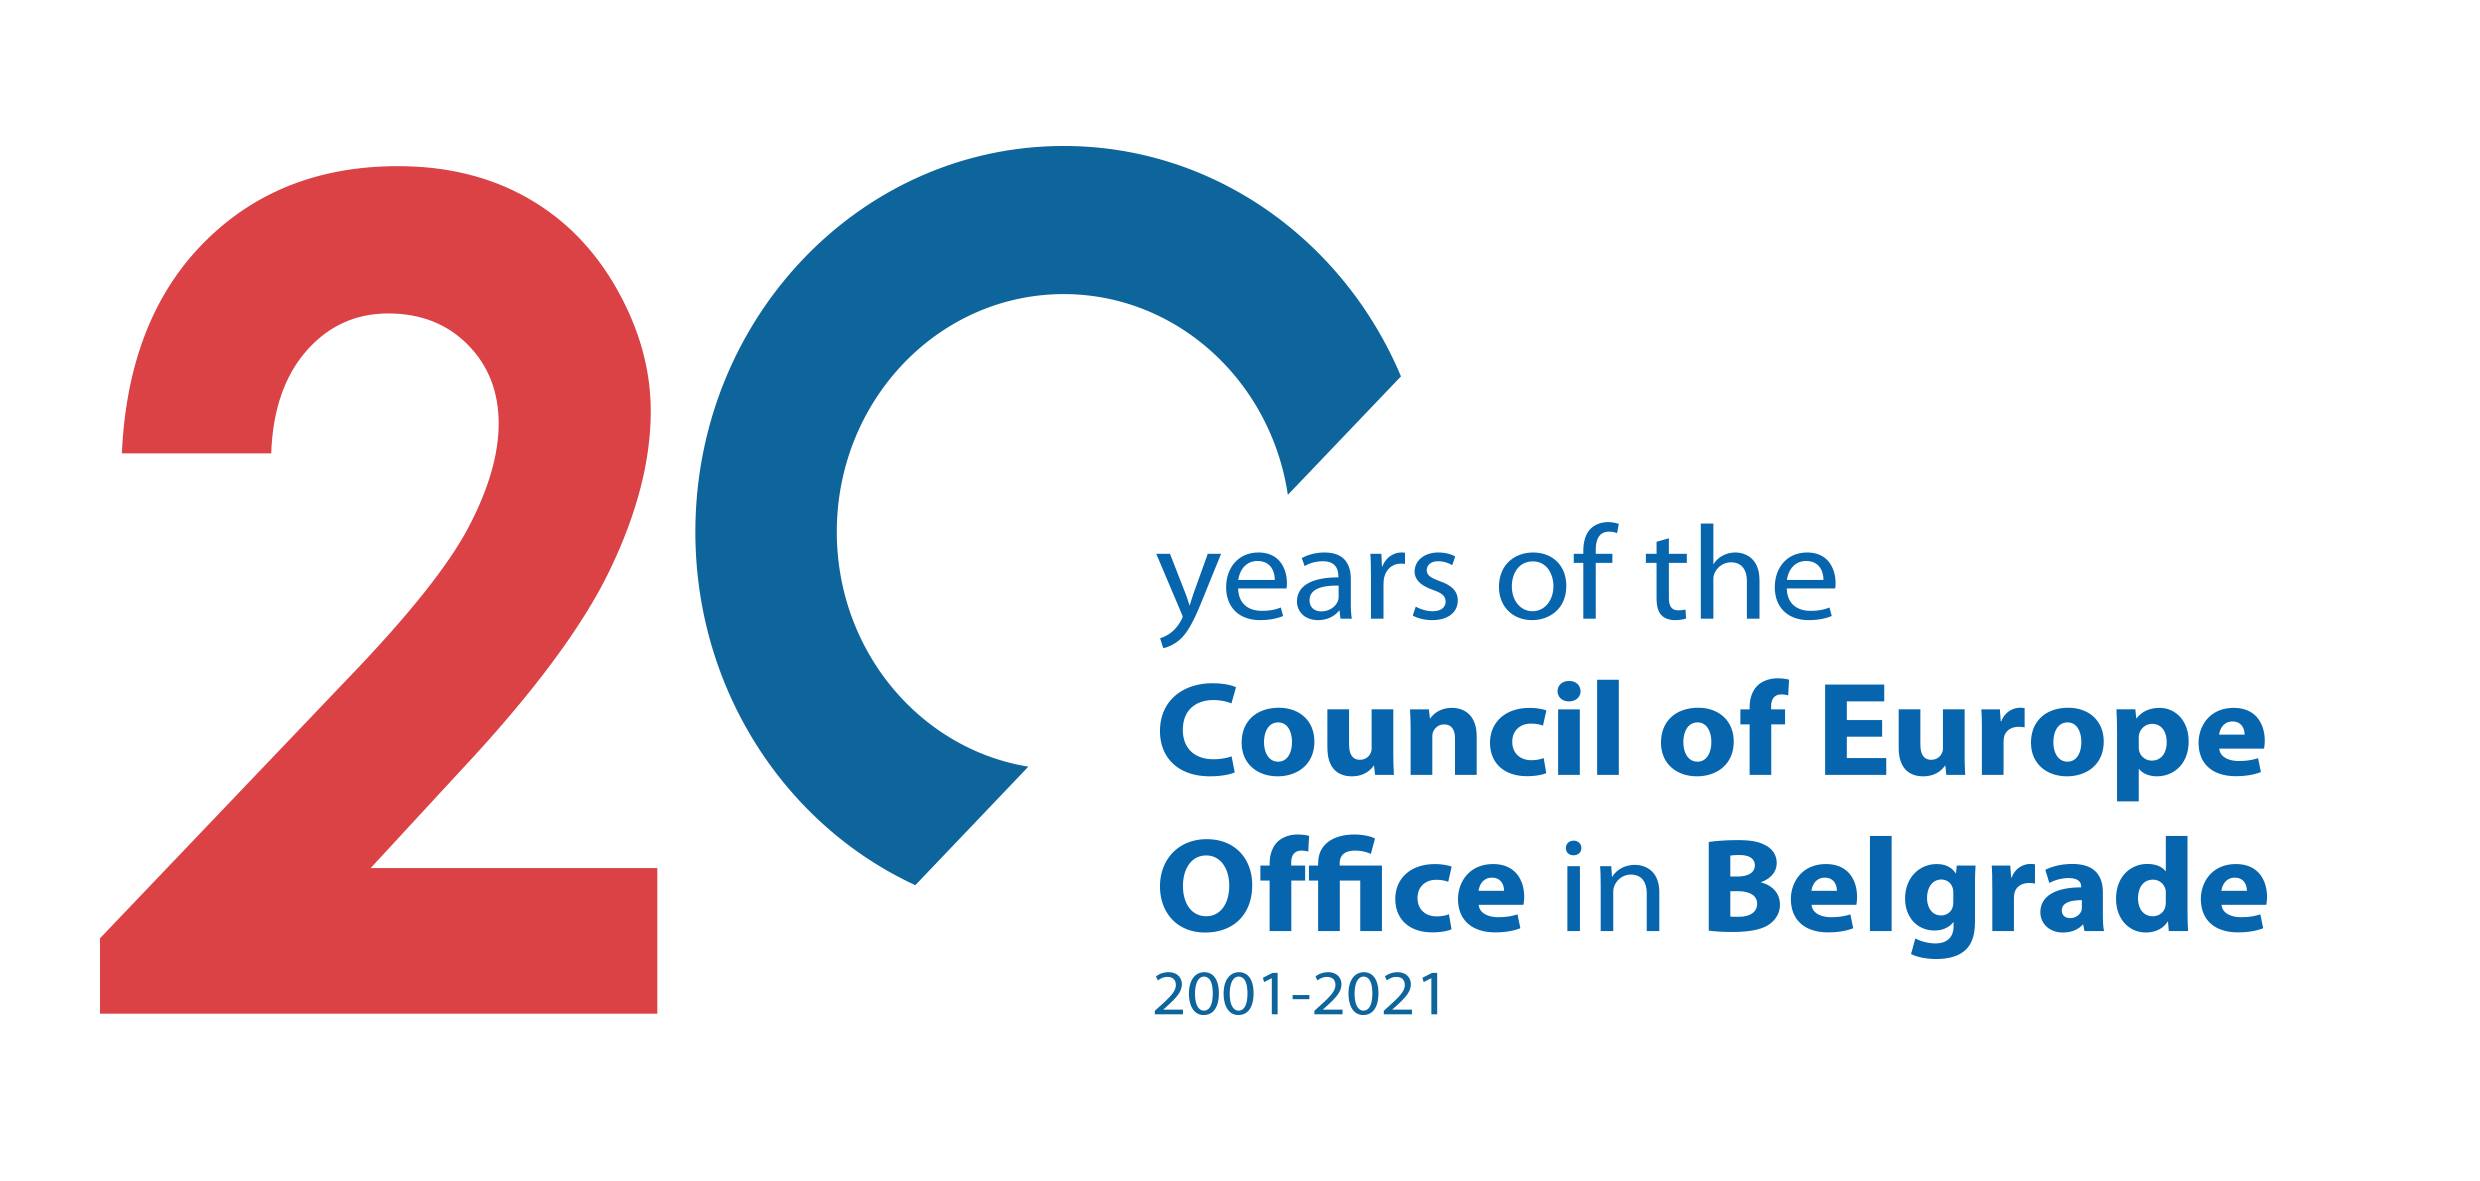 Promoting Equality and Diversity in Serbia: 20 years of cooperation for multiple diversity governance